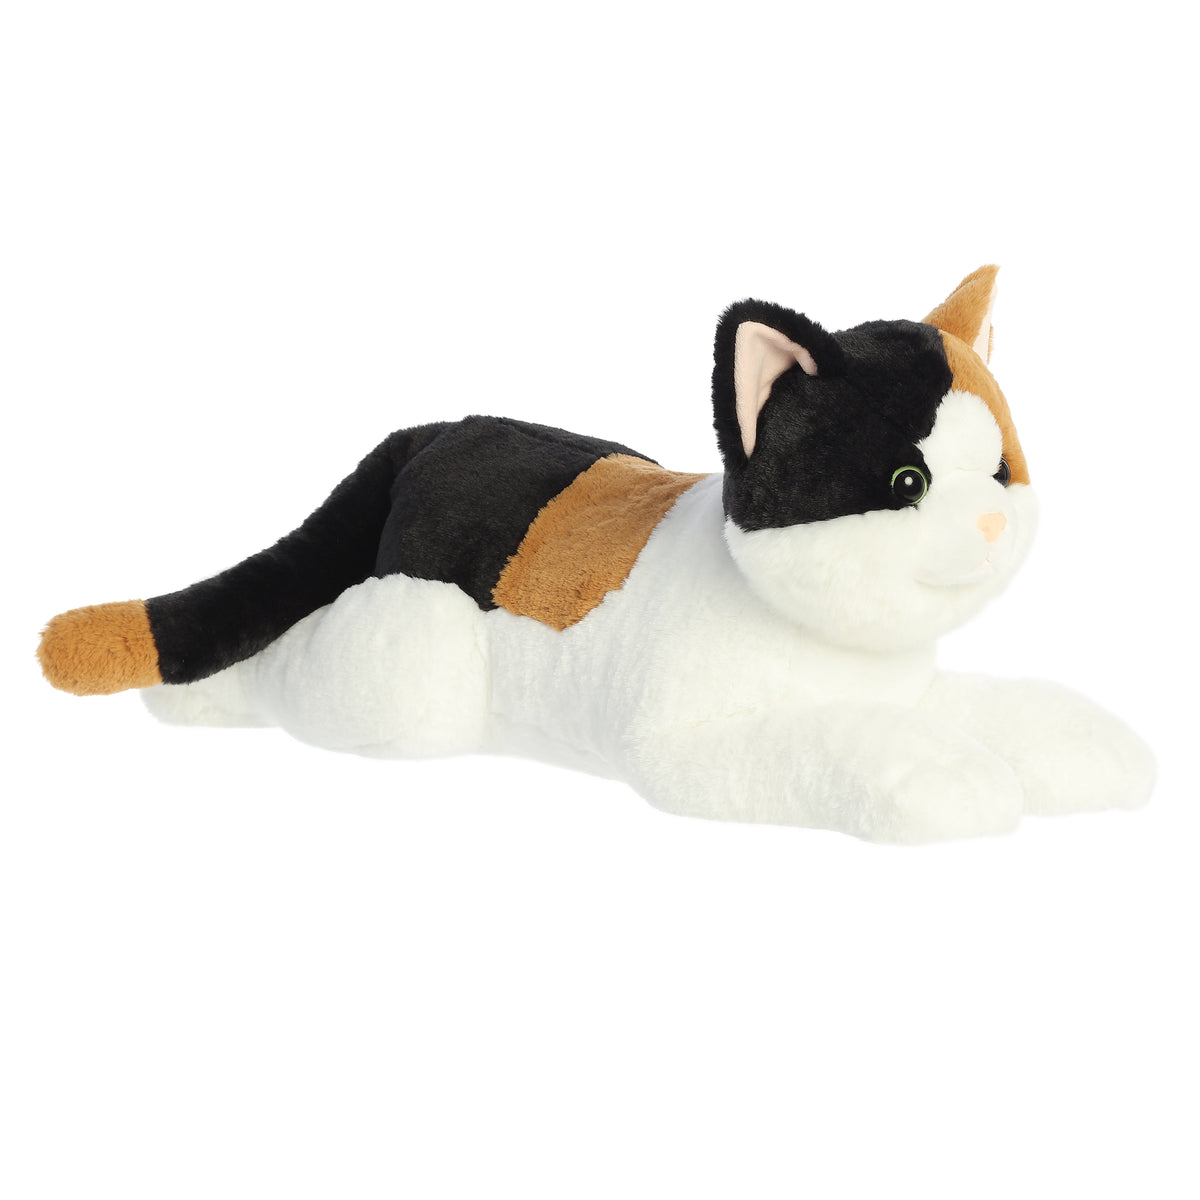 Large, huggable Esmeralda Cat plush in sleek black, rich brown, and white, from the Super Flopsie collection.